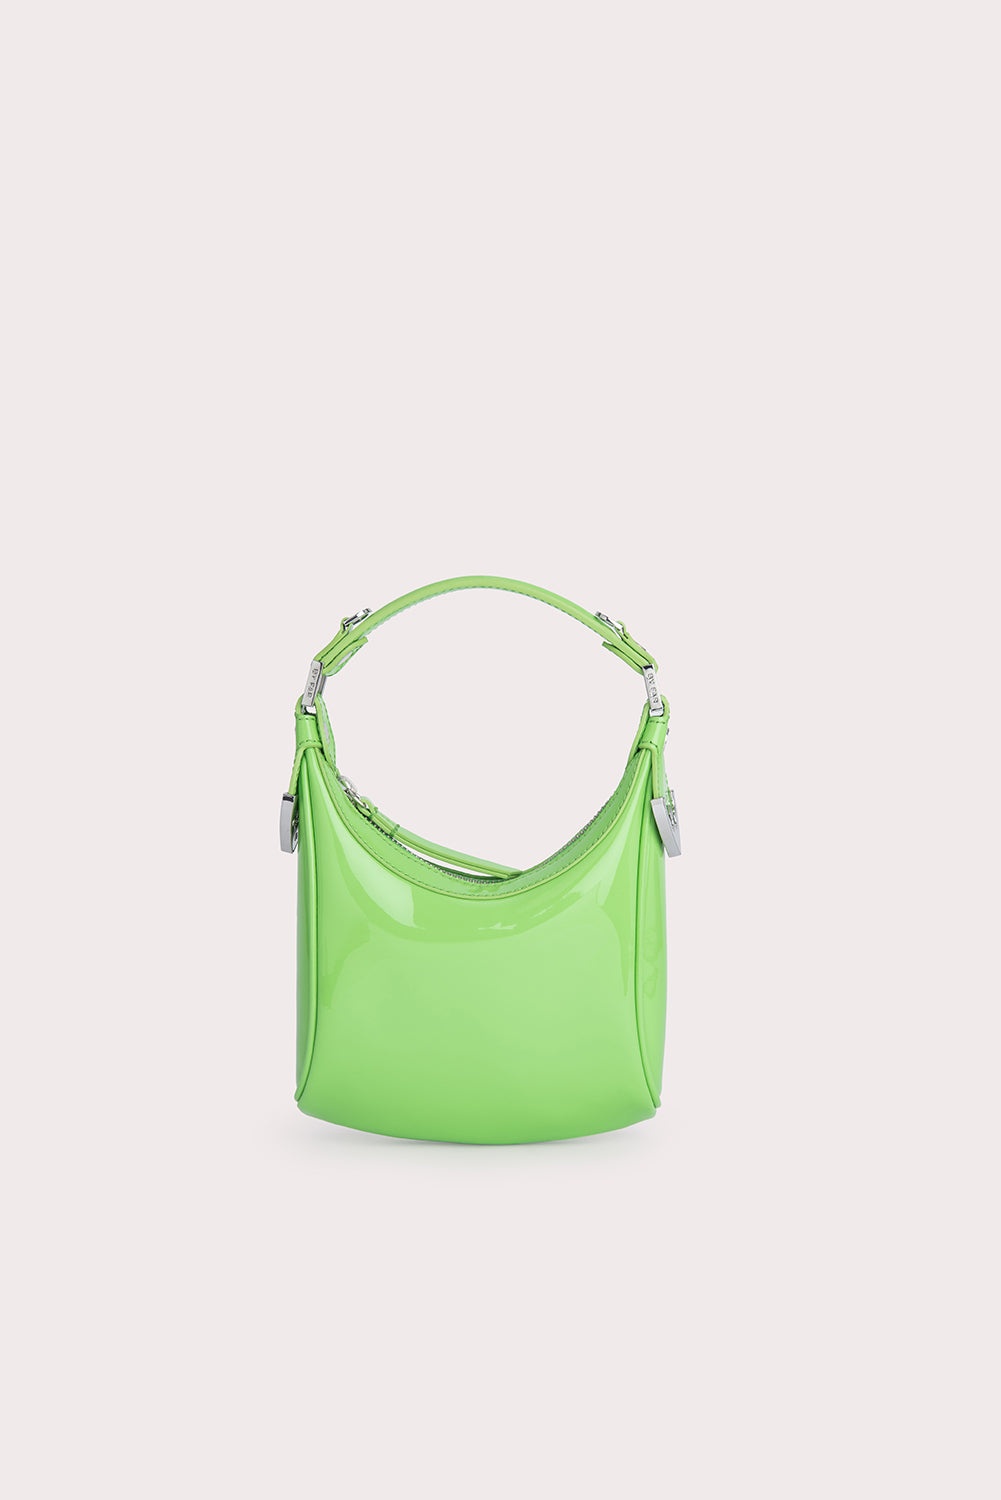 Cosmo Fresh Green Patent Leather - 1